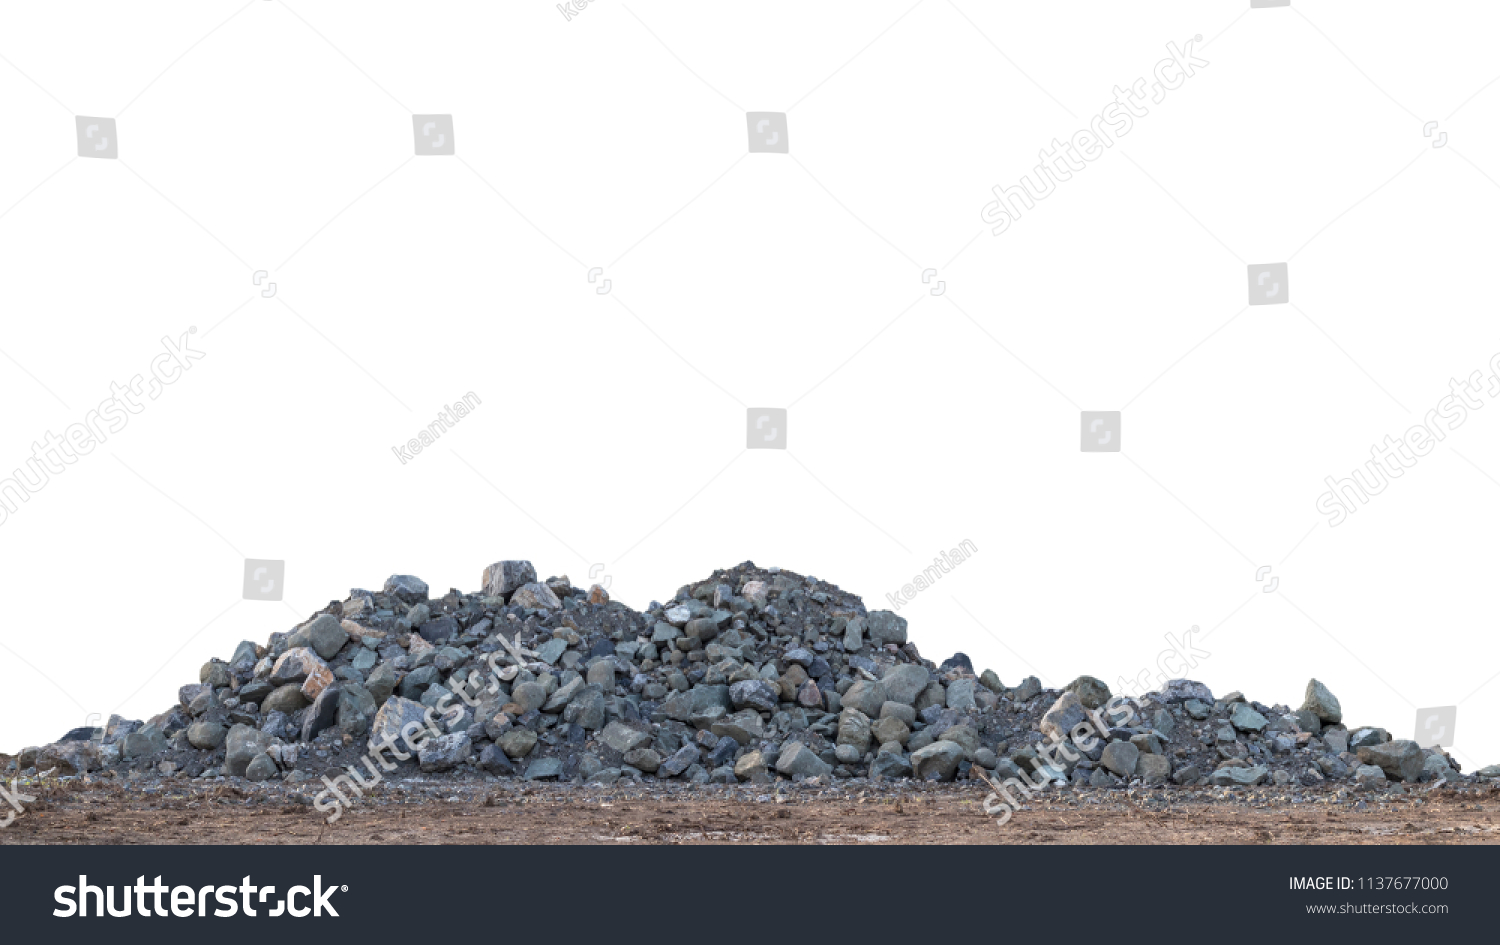 Isolate View A large granite pile on the ground to prepare for use as a construction material. #1137677000